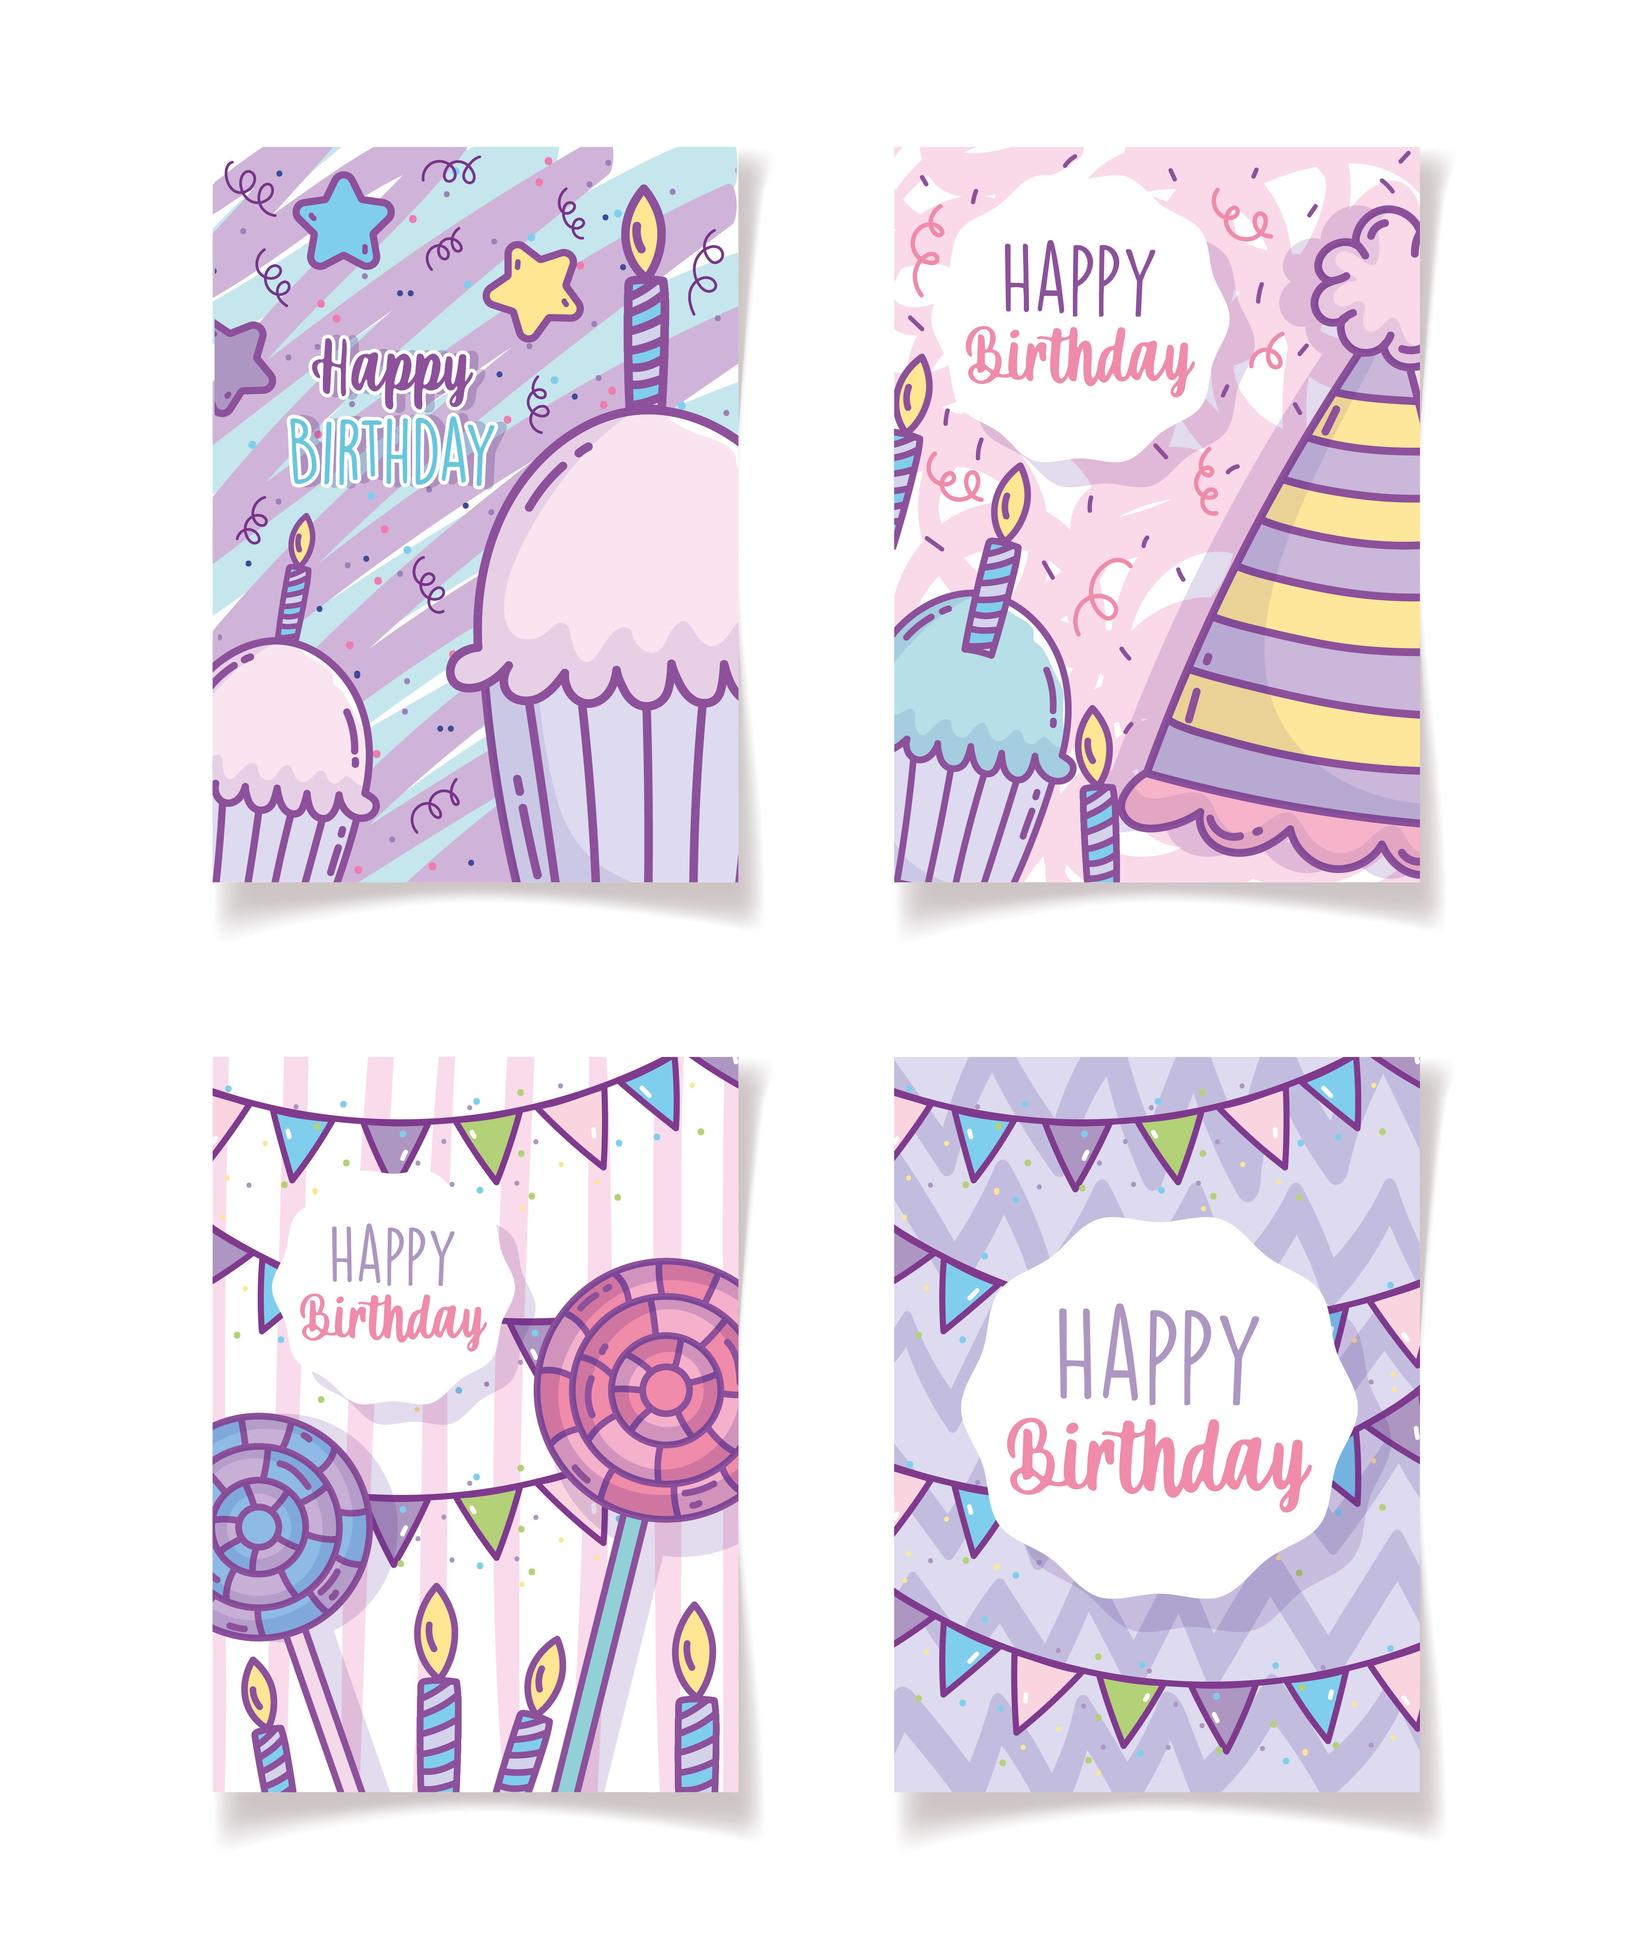 simple-affordable-birthday-card-inserts-for-handmade-cards-great